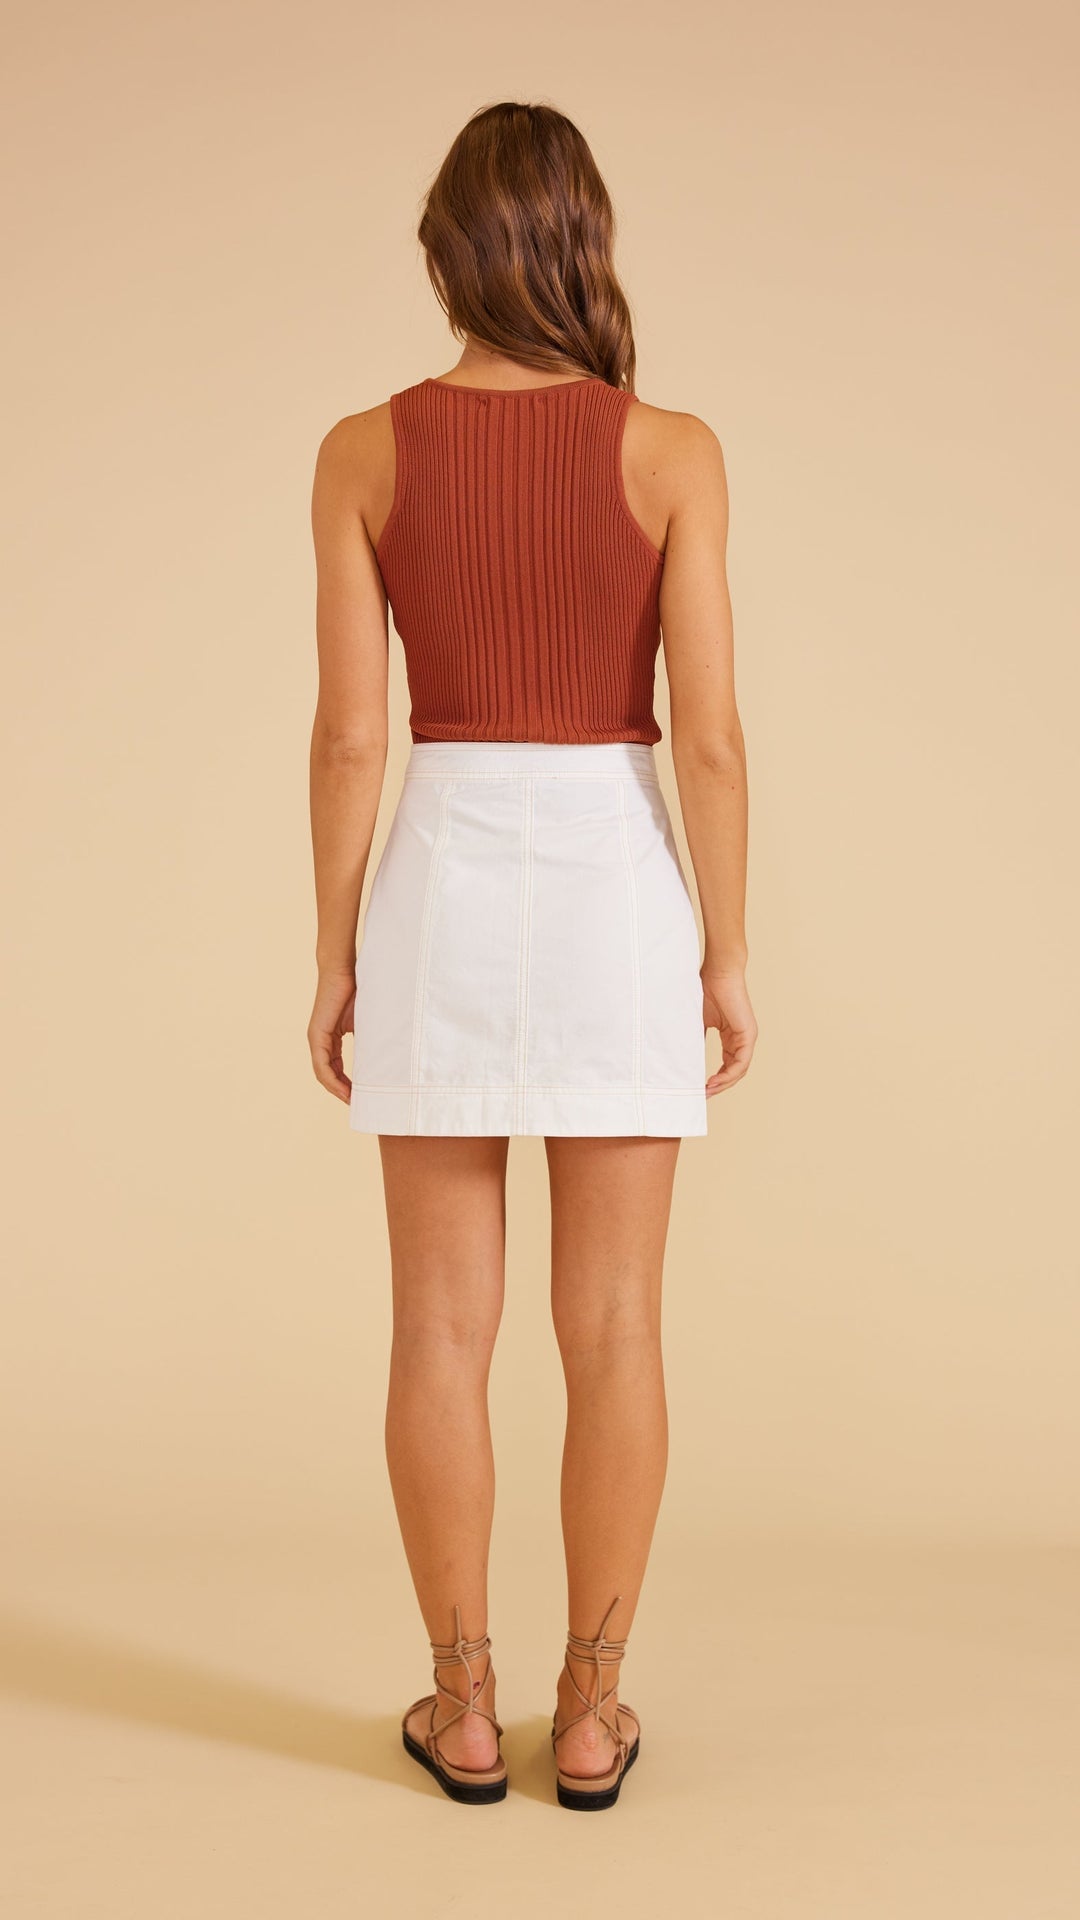 Gaia knit tank top in tobacco colour by minkpink. Ribbed top. Summer23. Jolie folie boutique